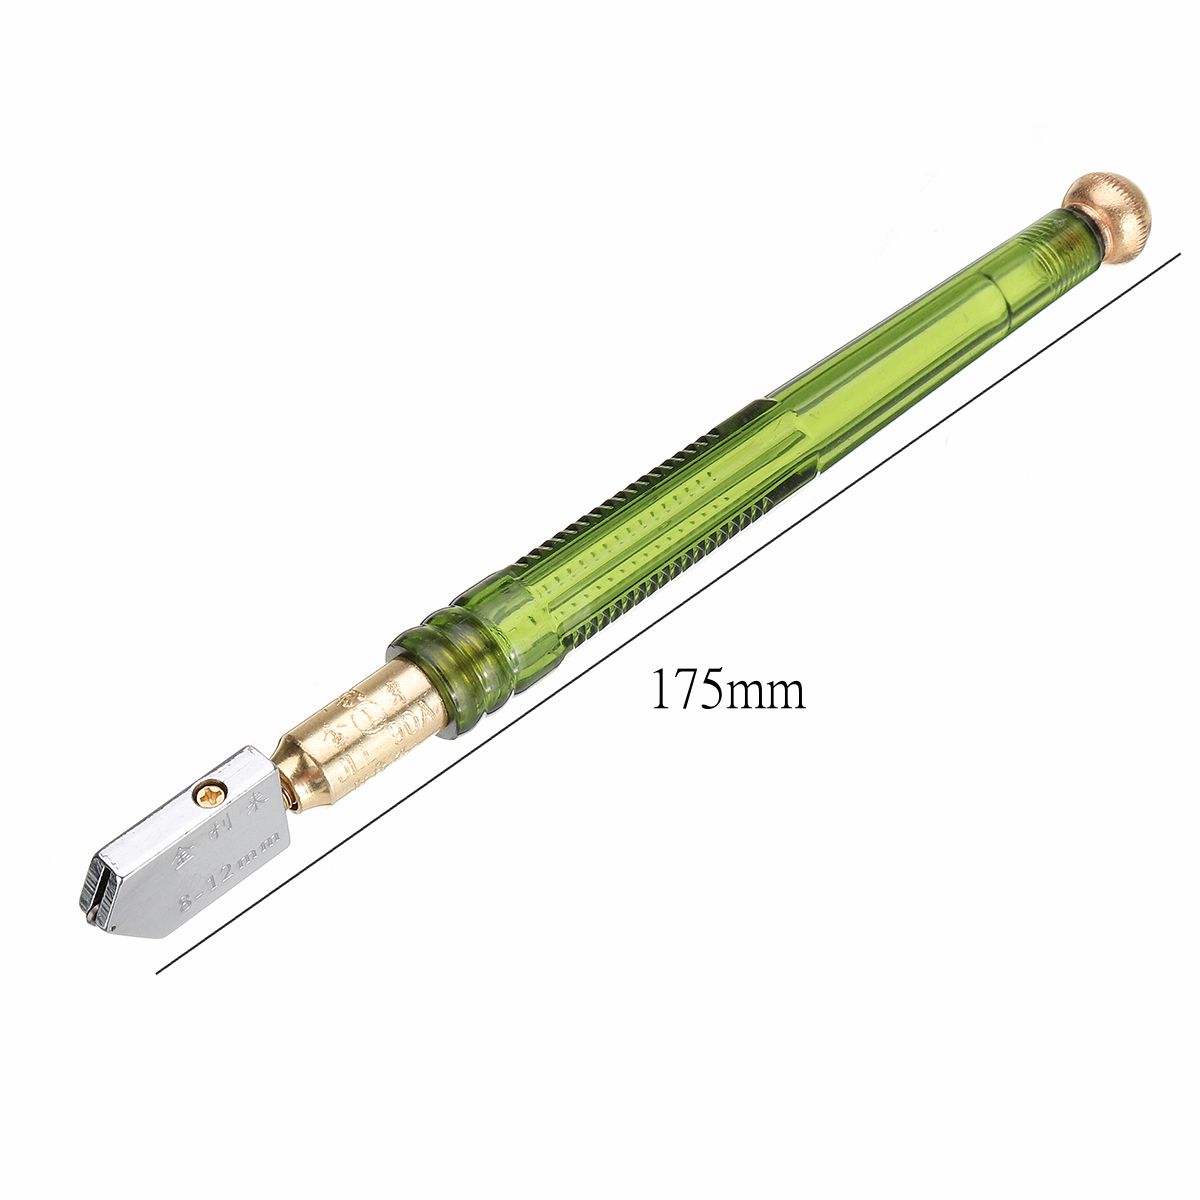 Professional-Glass-Cutter-Ceramics-Mirror-Cutting-Tipped-Glass-Cutting-Tool-with-Anti-Slip-Handle-1307224